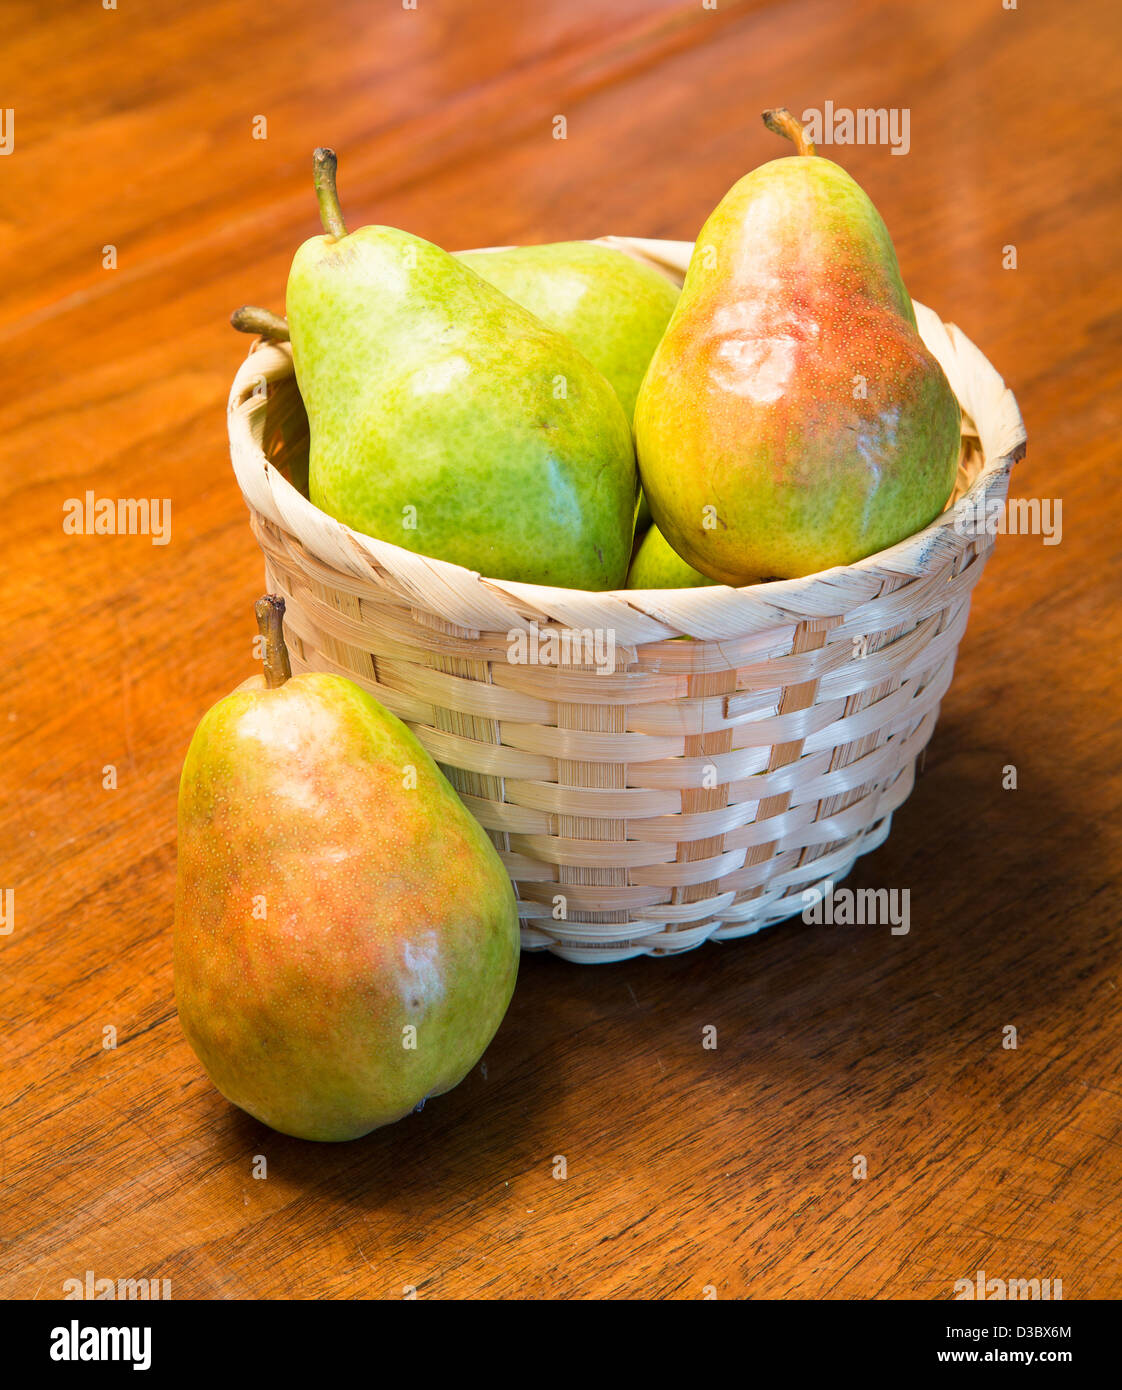 Fresh bartlett pears in a basket on a wood table Stock Photo